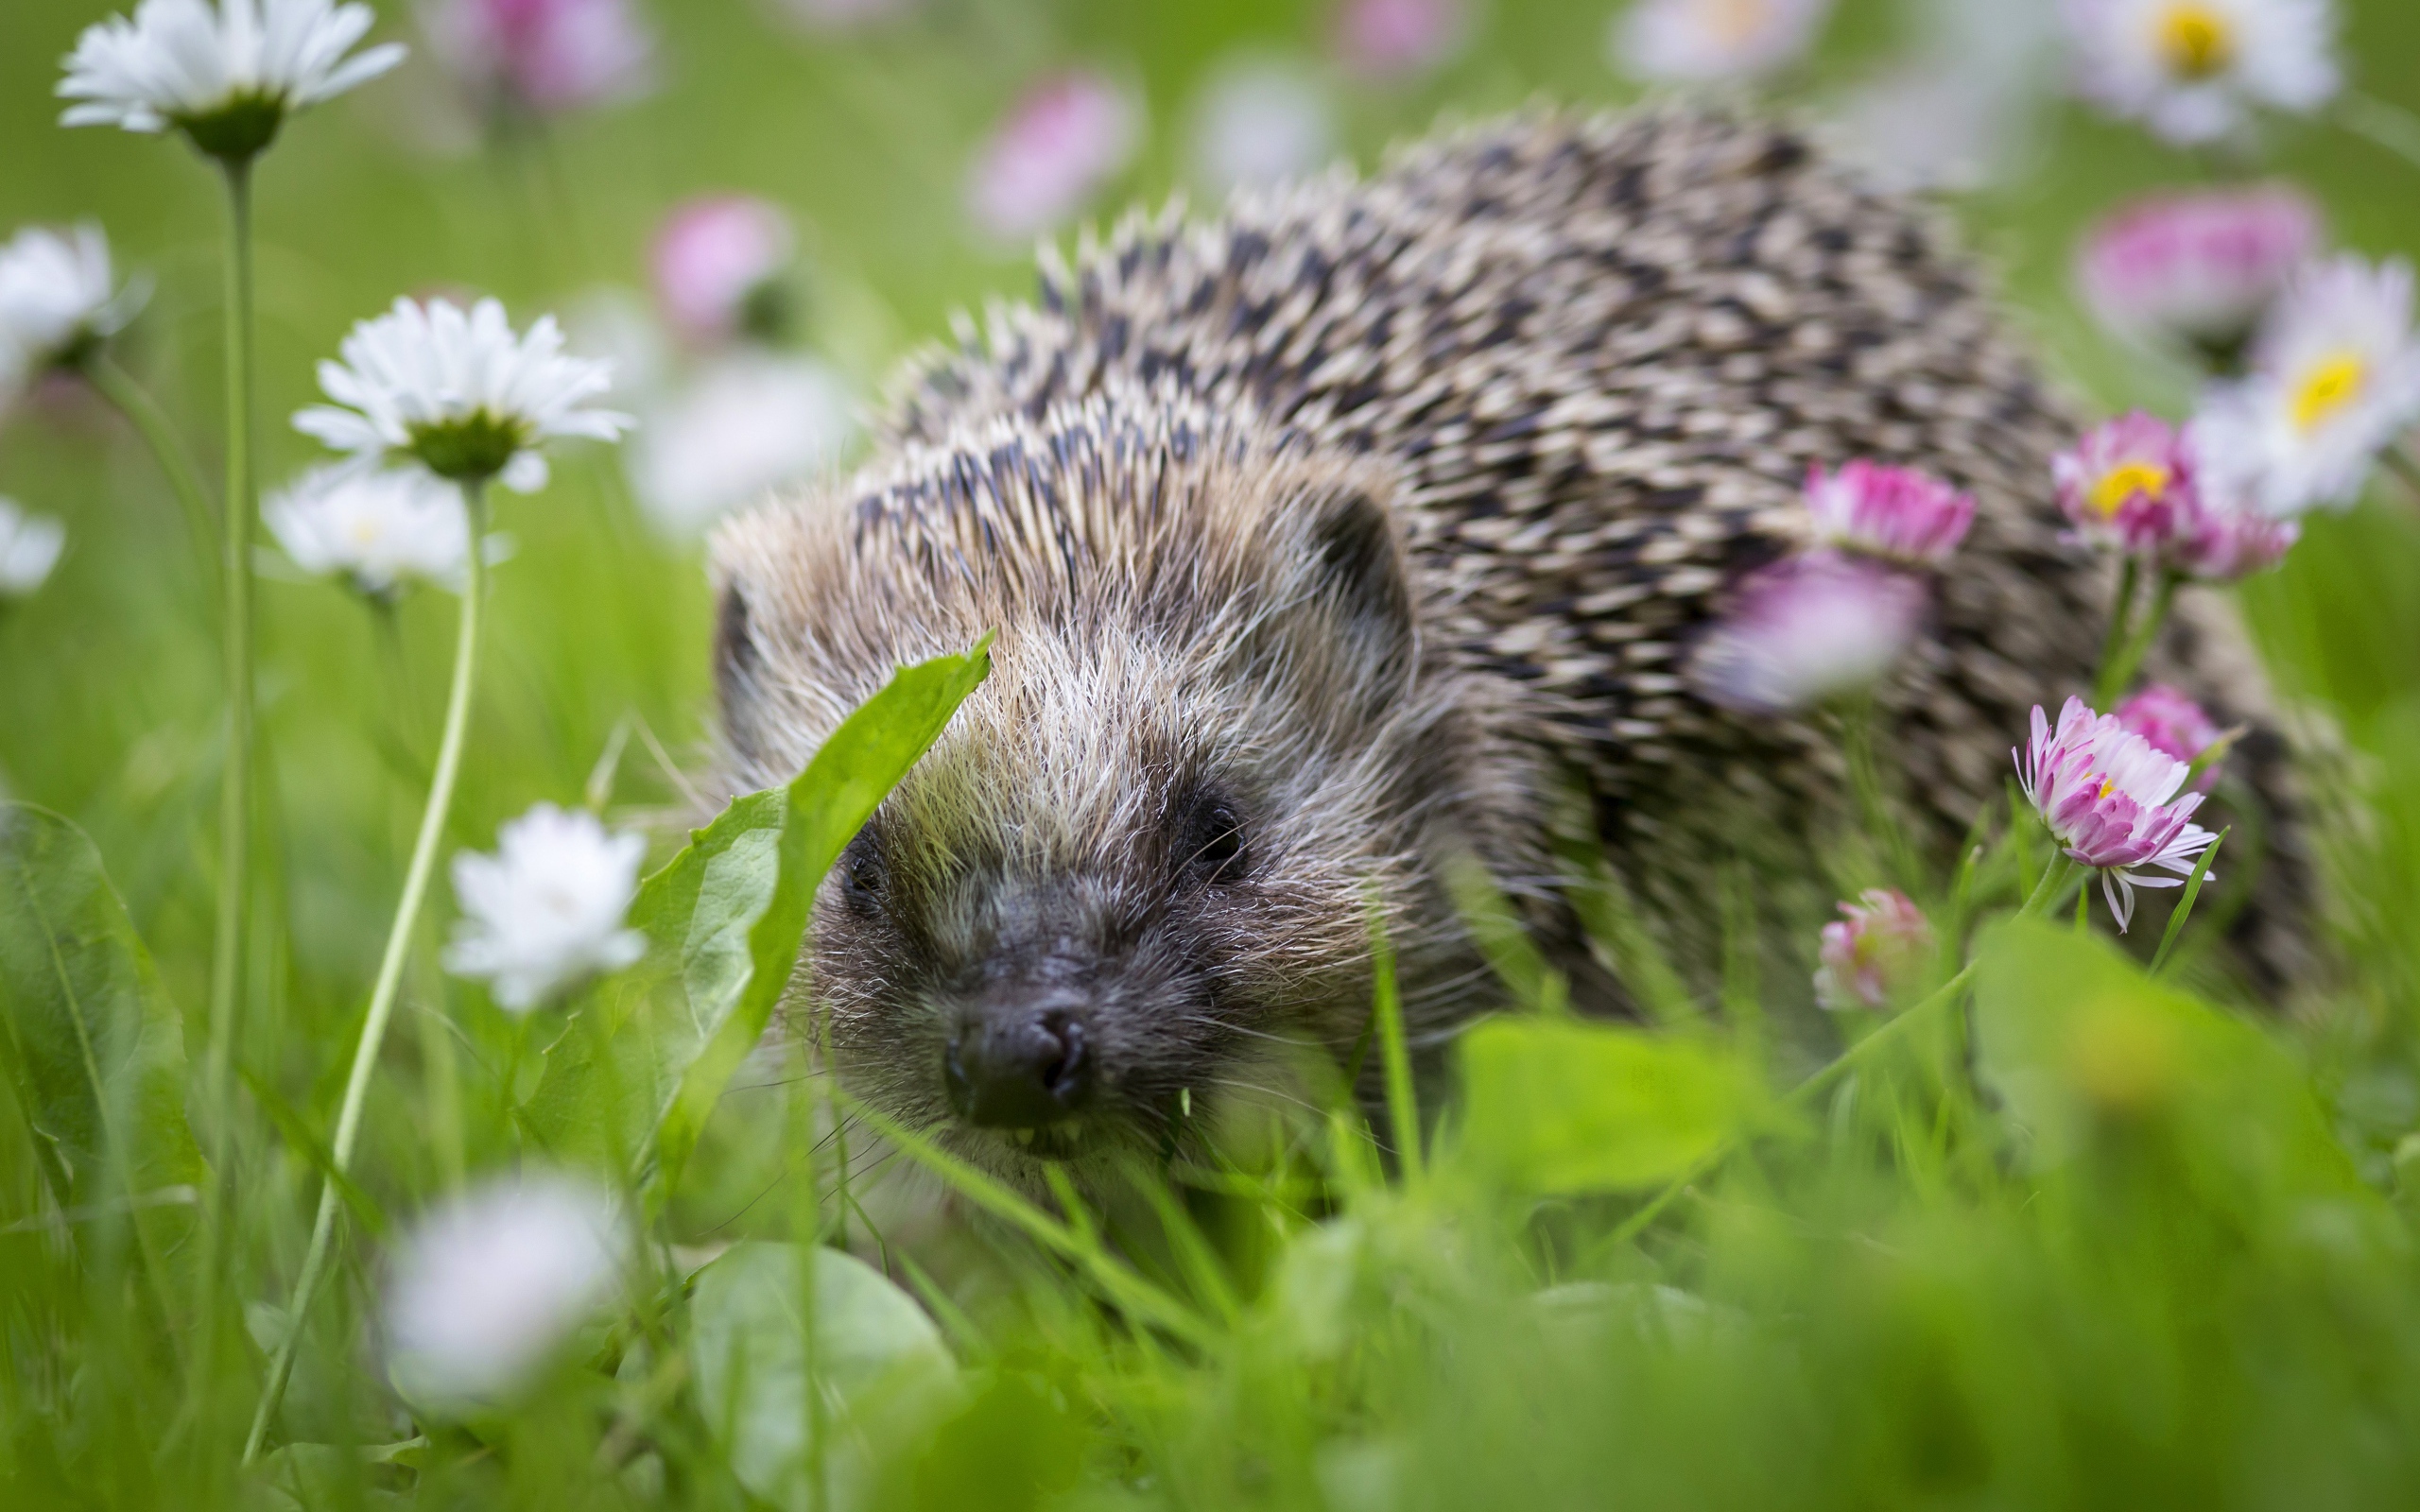 Little hedgehog in green grass with white and pink daisies